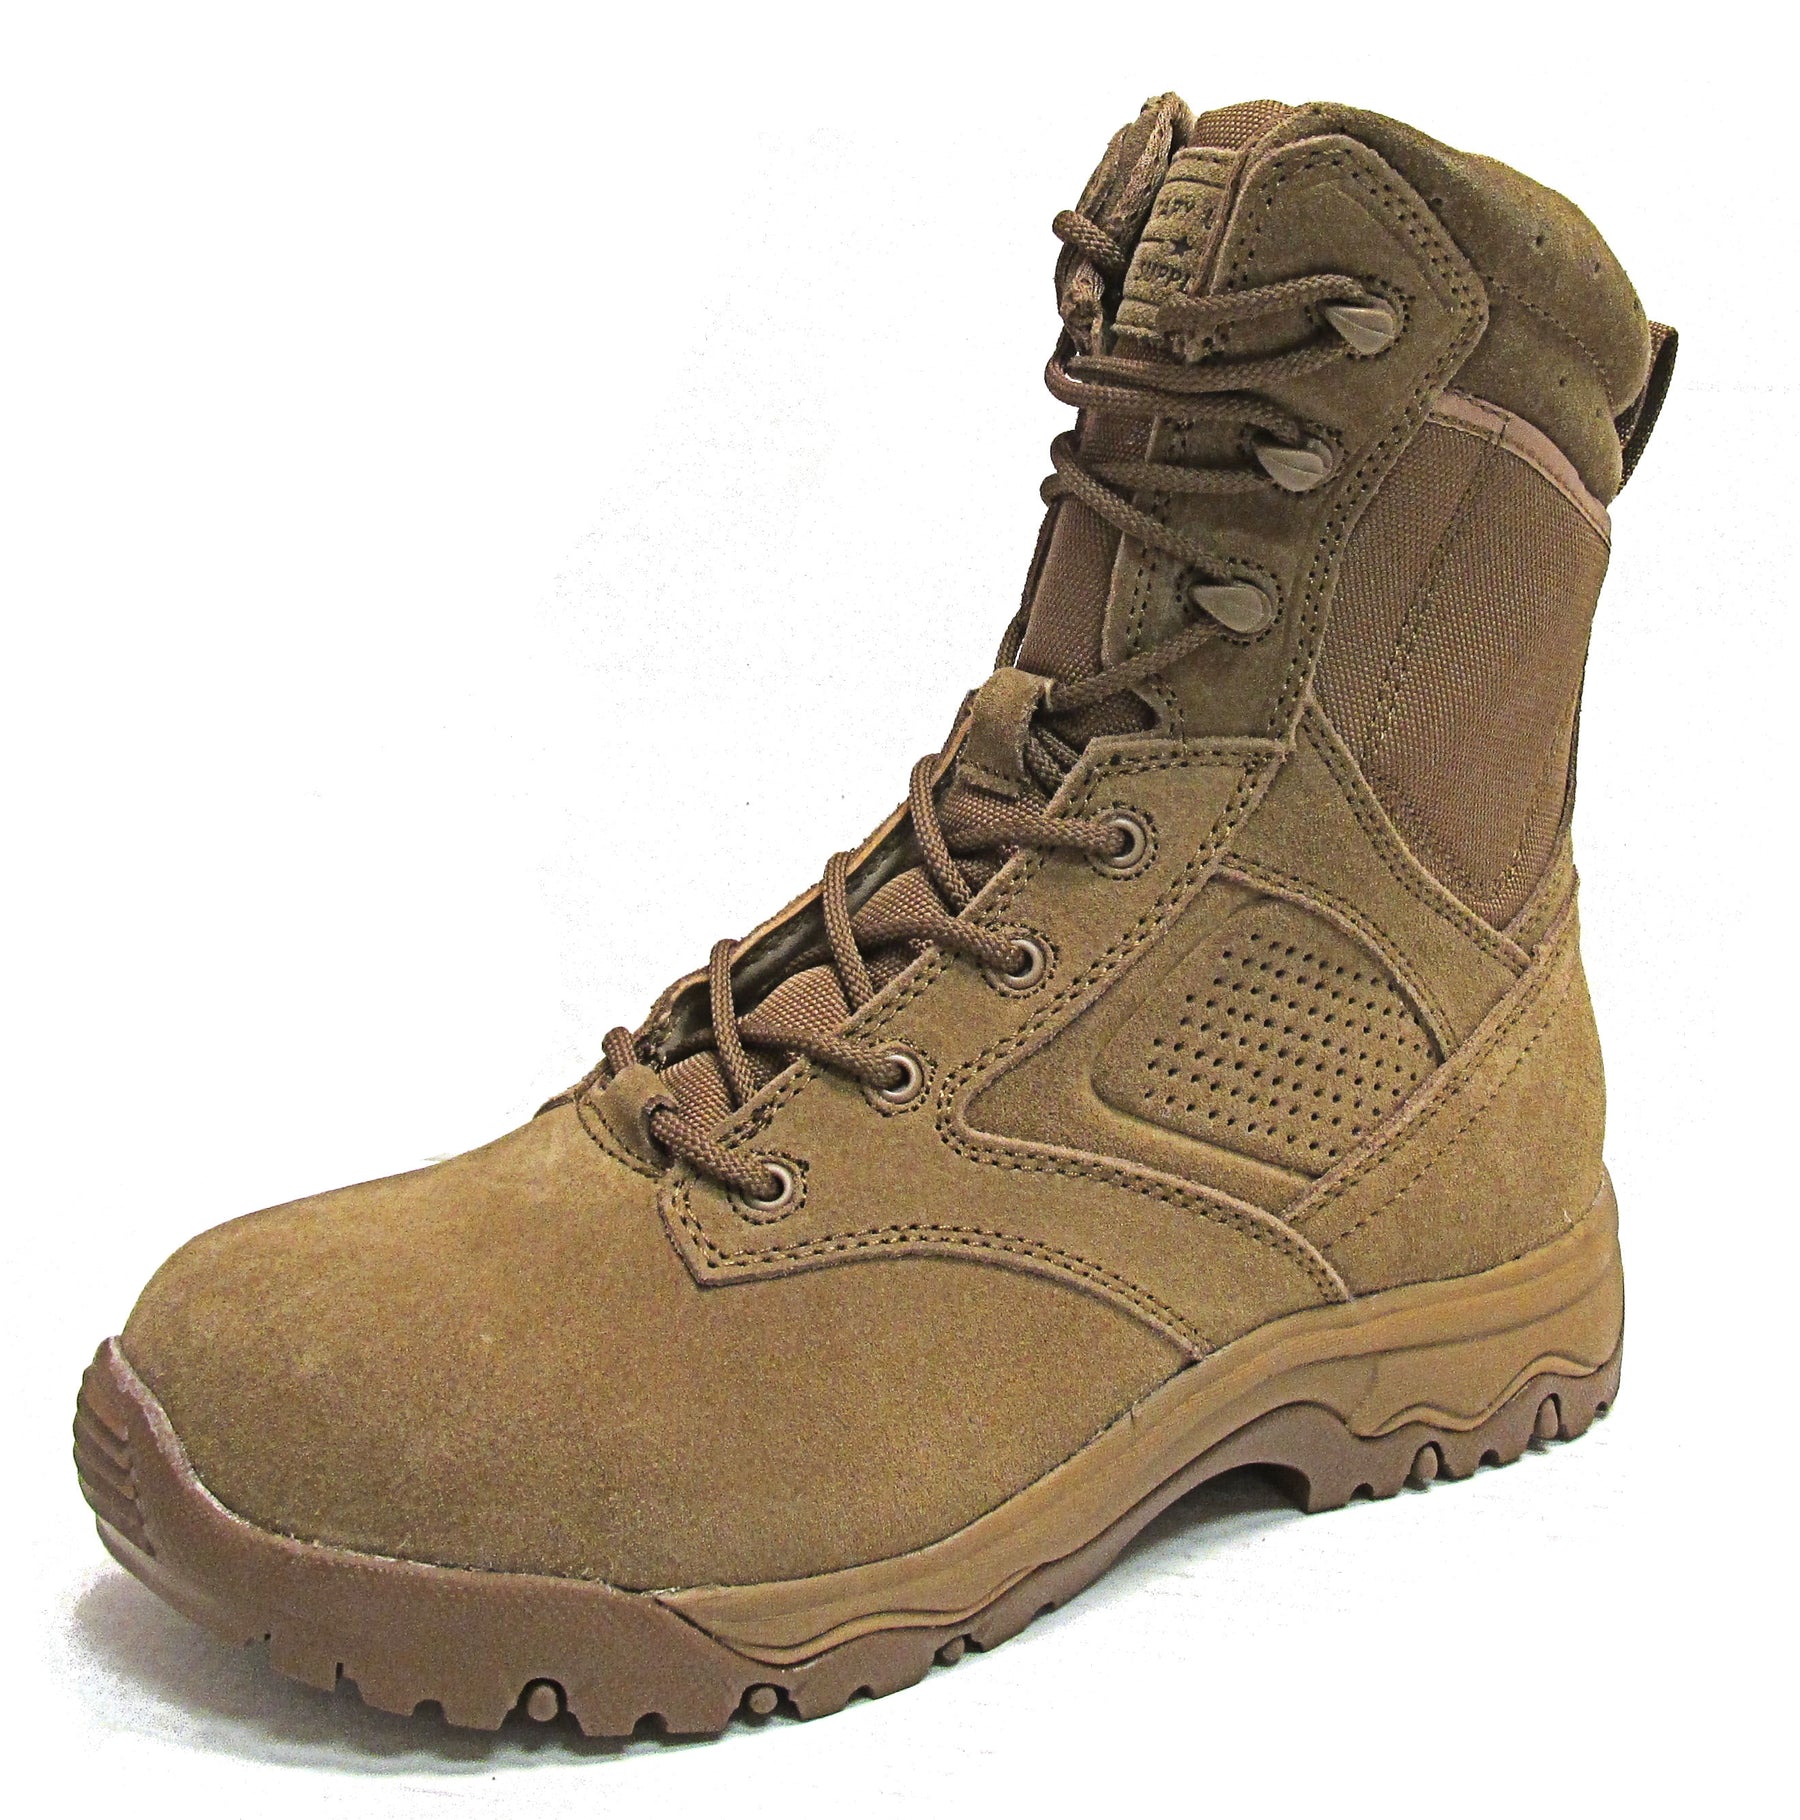 Military Uniform Supply OCP Tactical Boots - Coyote